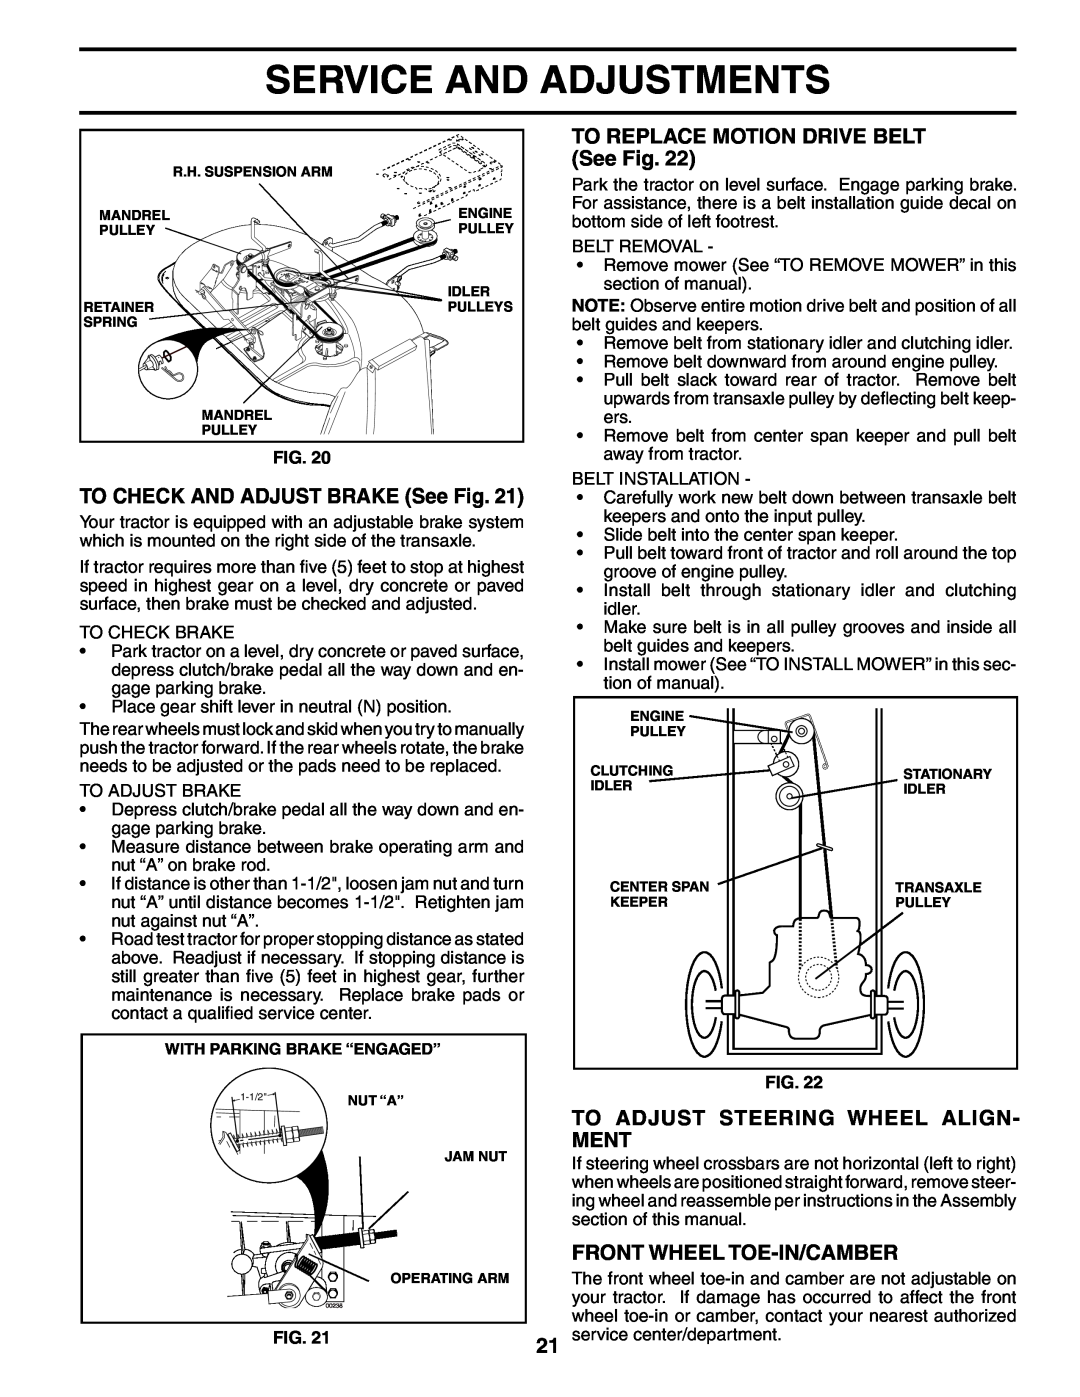 Weed Eater 187637 manual TO REPLACE MOTION DRIVE BELT See Fig, TO CHECK AND ADJUST BRAKE See Fig, Front Wheel Toe-In/Camber 